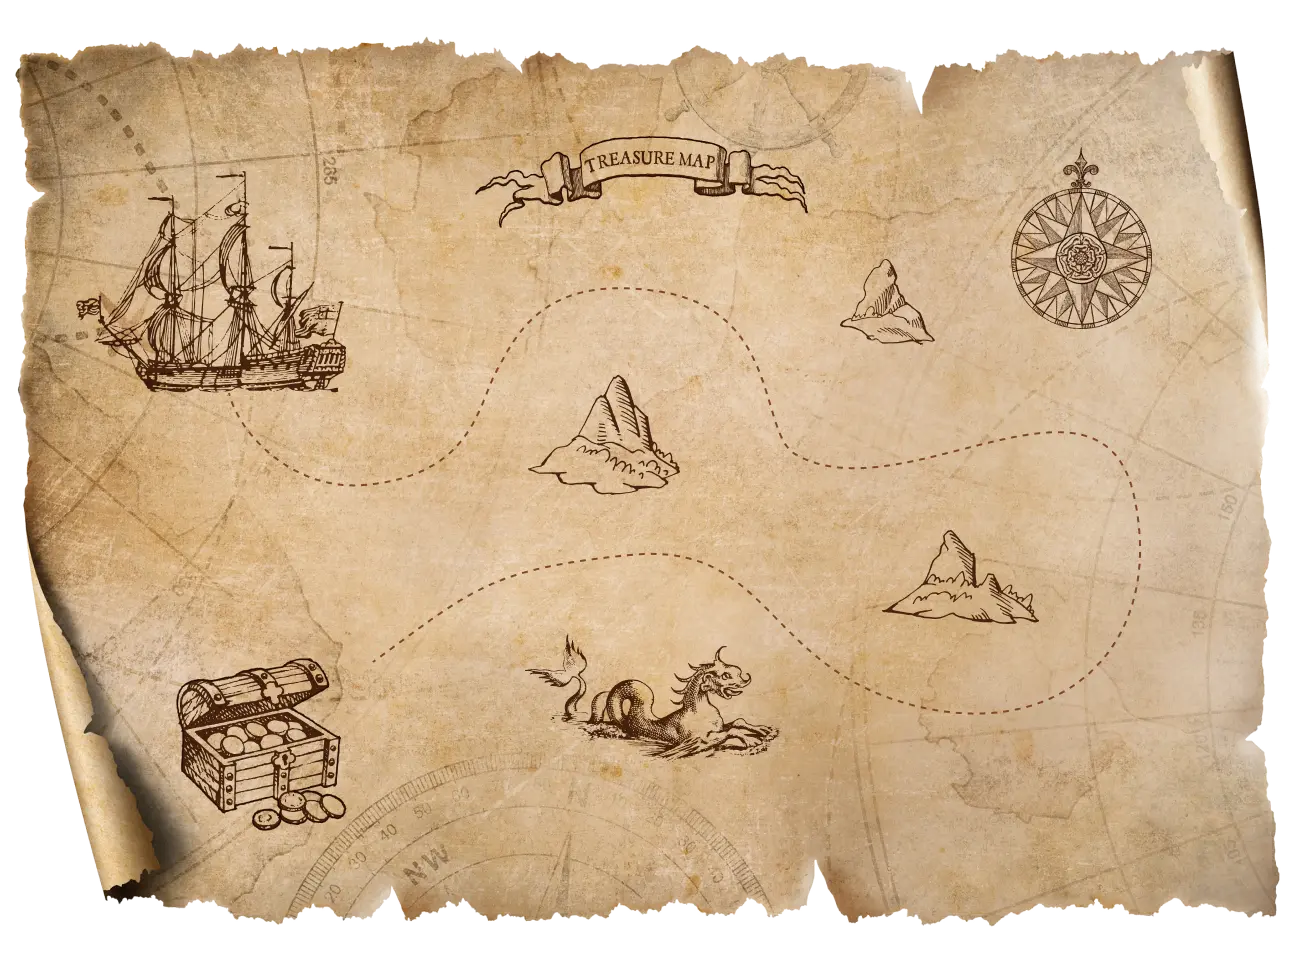 Treasure map showing 7 common business challenges